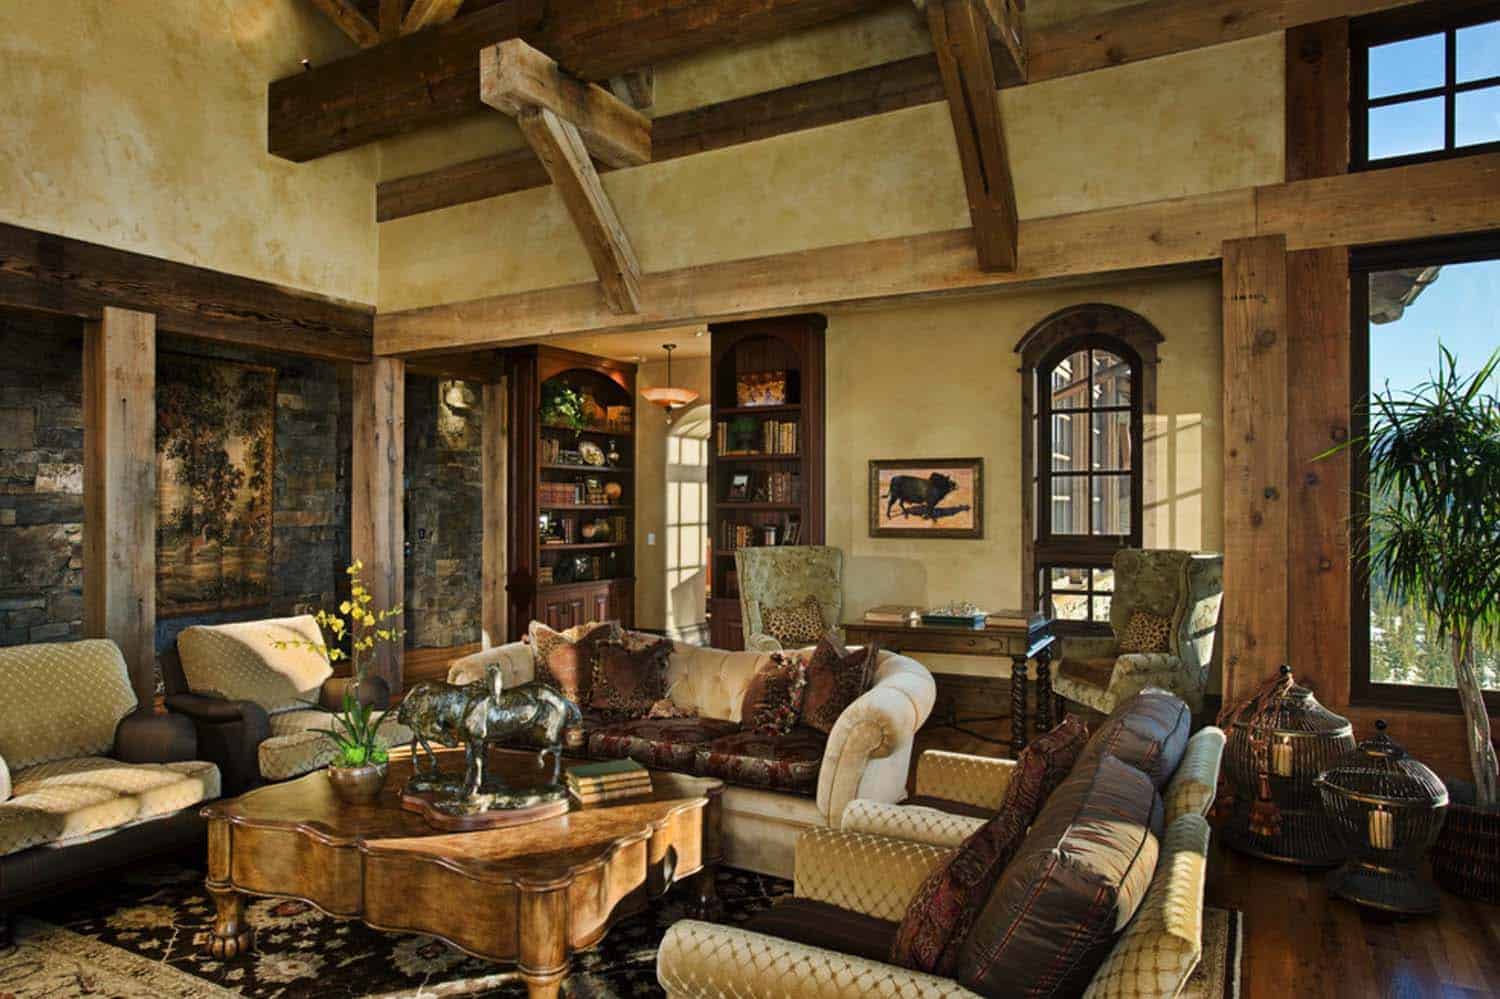 residence-rustic-home-library